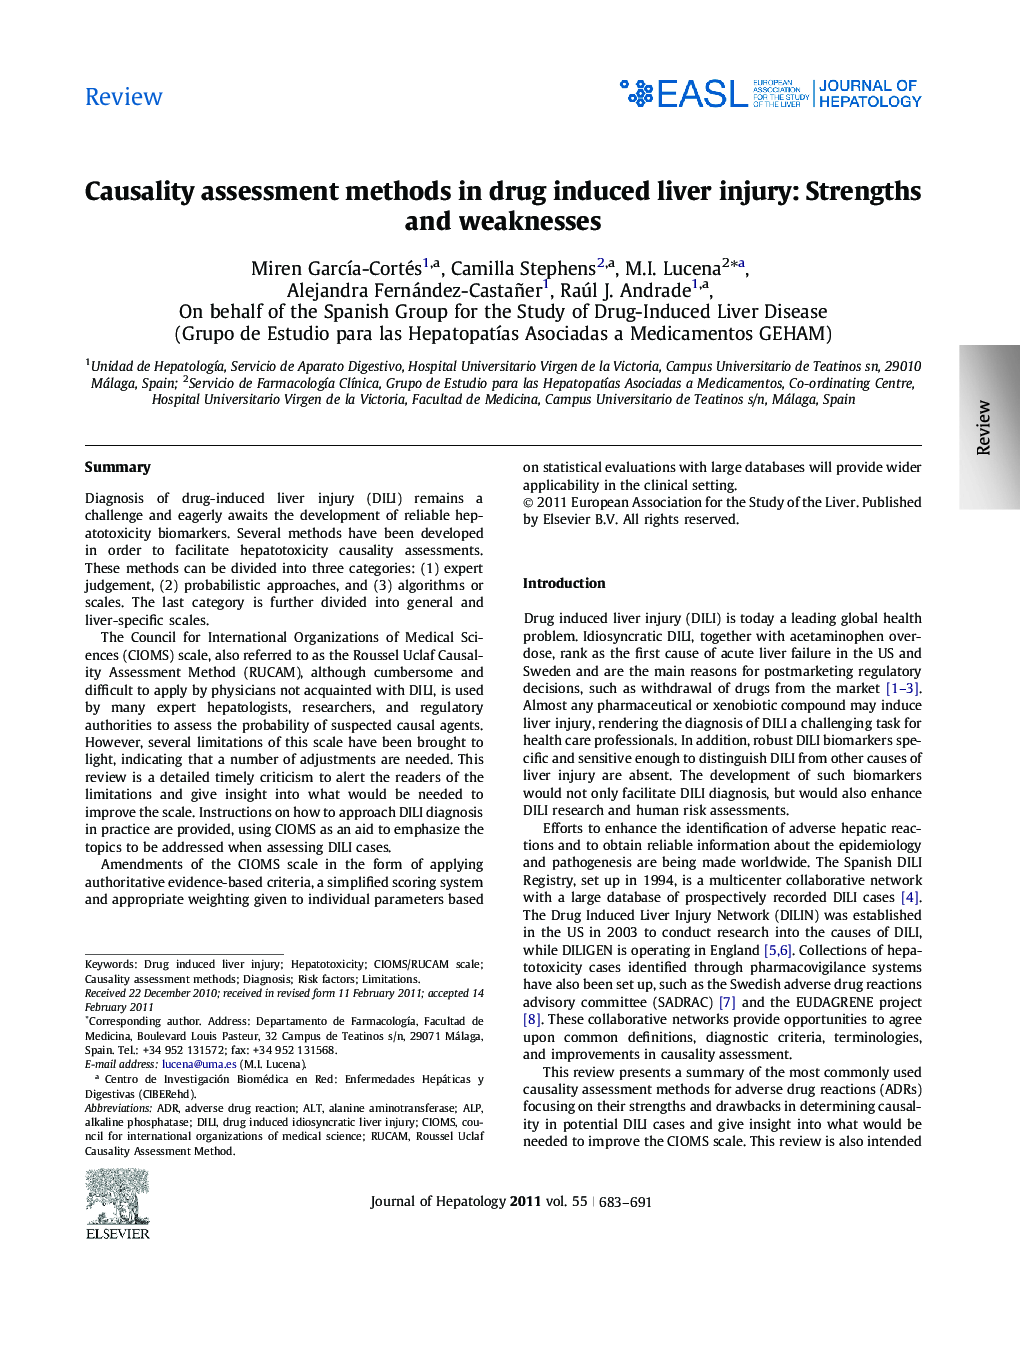 ReviewCausality assessment methods in drug induced liver injury: Strengths and weaknesses